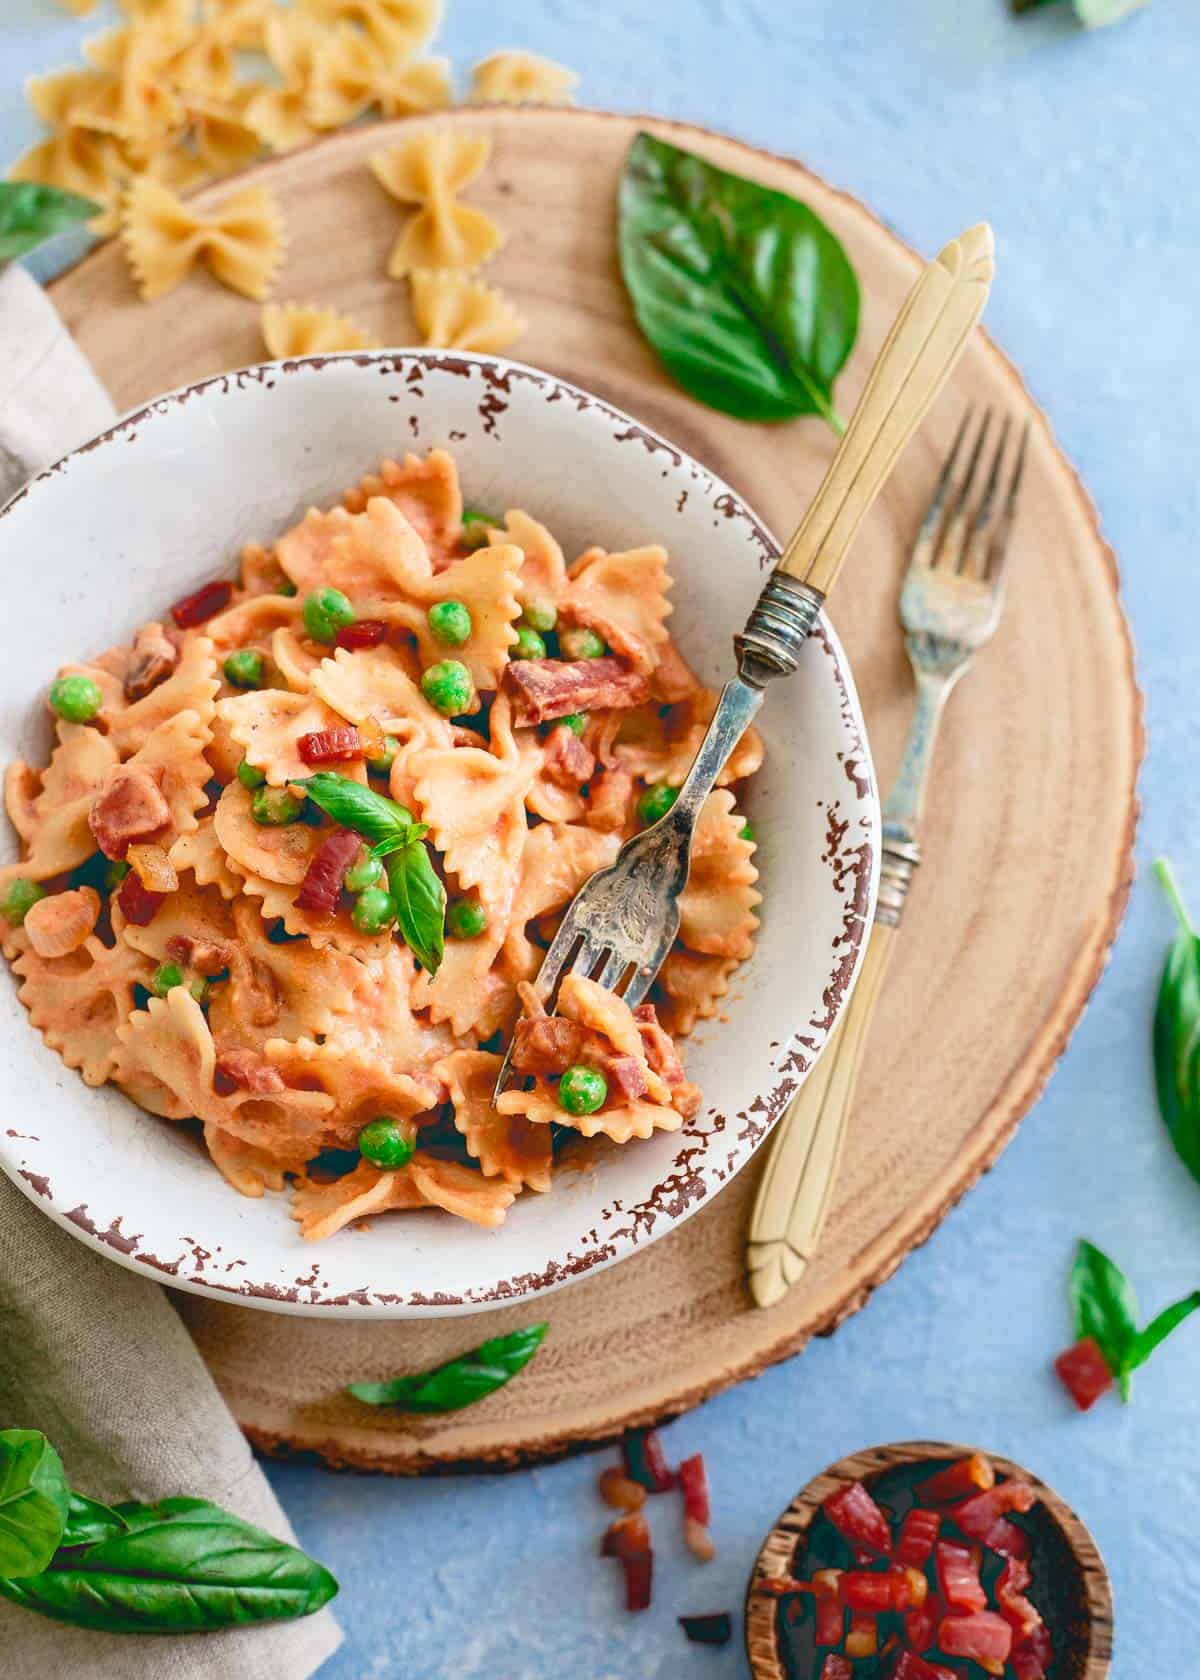 This 20 minute creamy tomato farfalle brings a healthy spin to traditional cream sauce with peas and crispy prosciutto for an easy, filling meal.